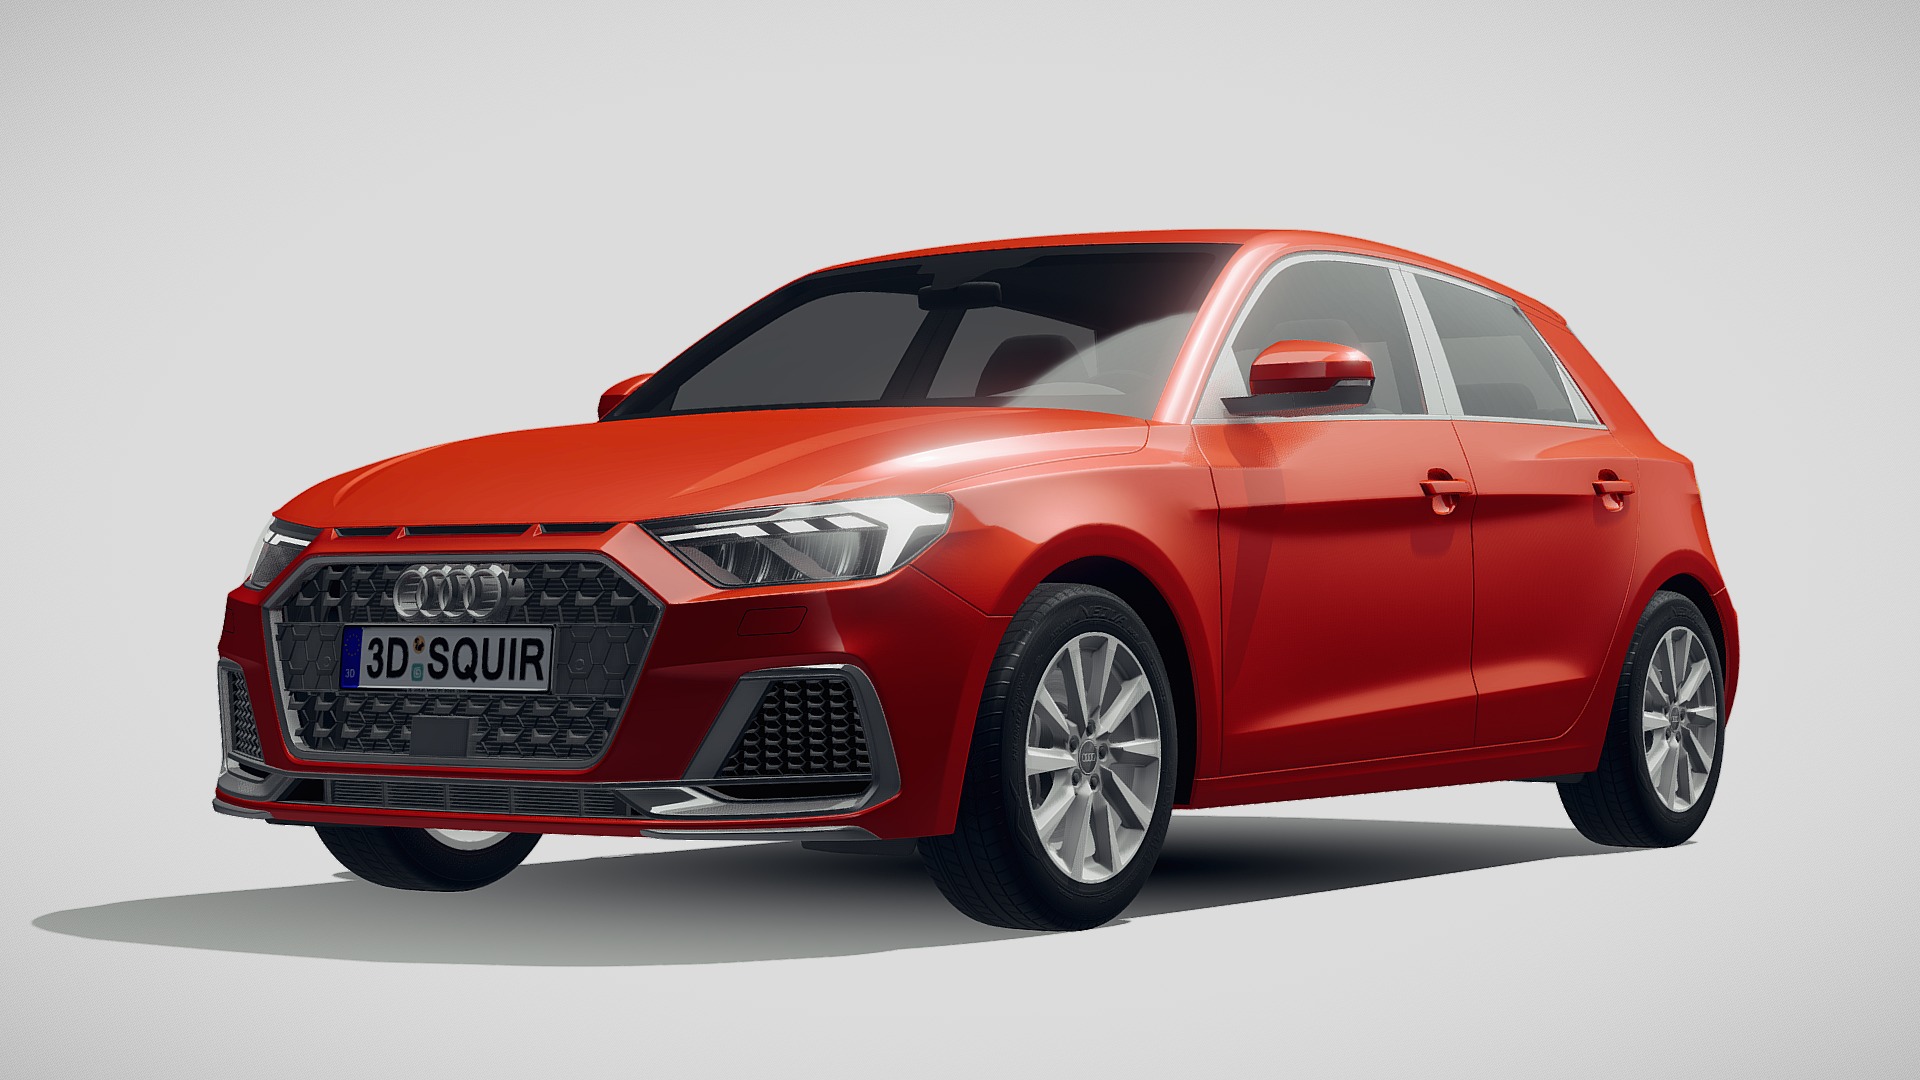 3D model Audi A1 2019 - This is a 3D model of the Audi A1 2019. The 3D model is about a red car with a white background.